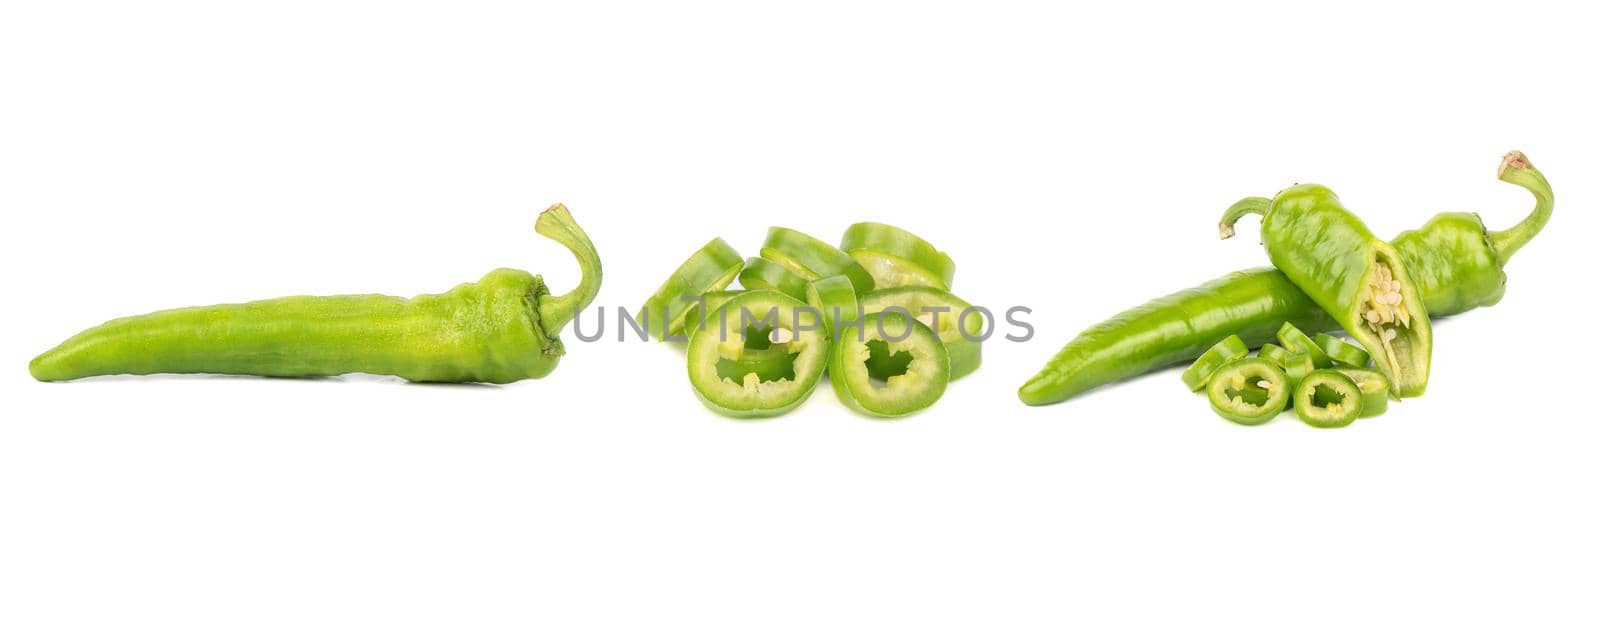 Green jalapeno peppers collection by andregric